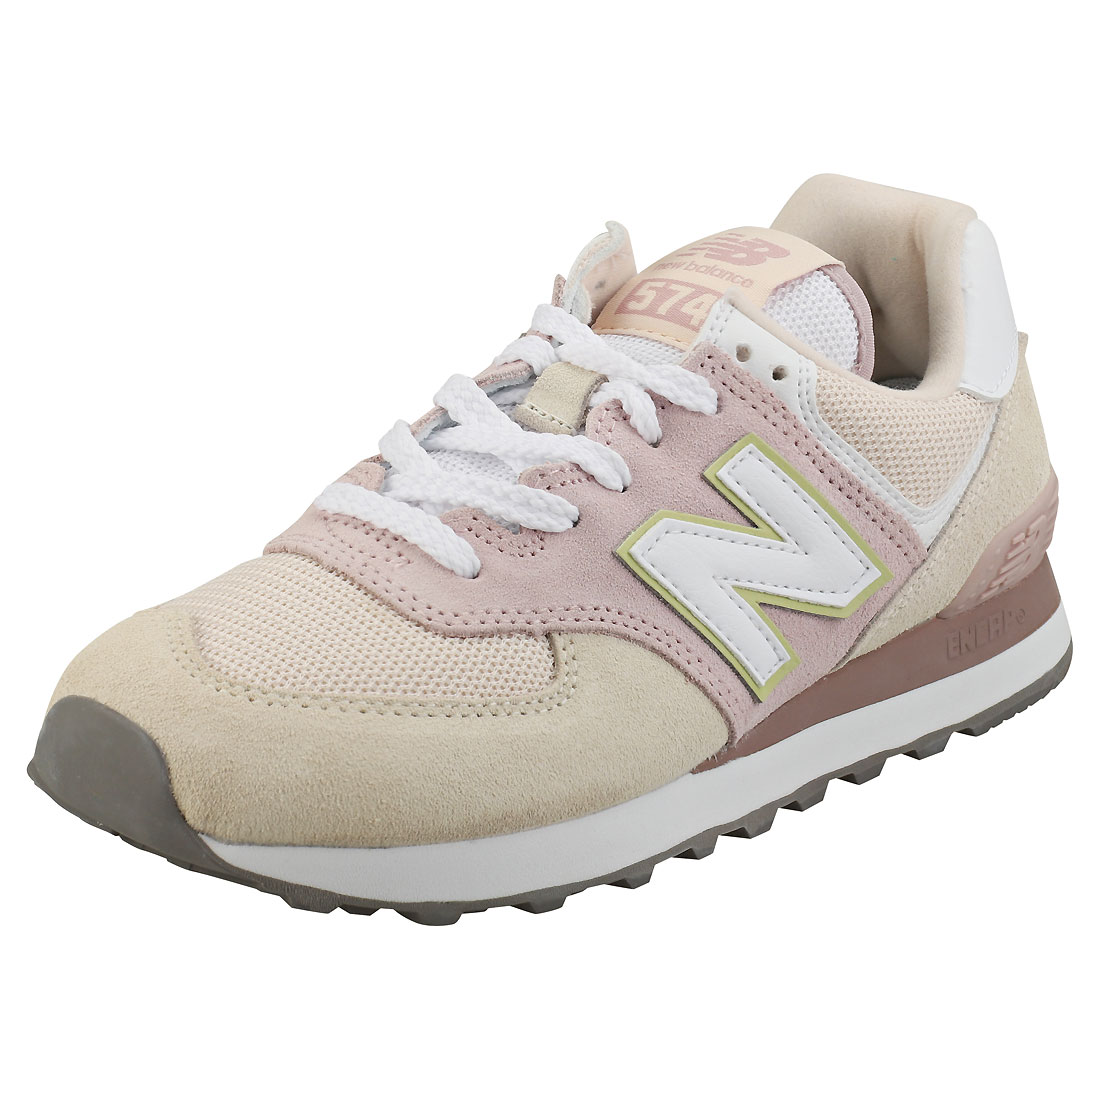 new balance 574 pink suede